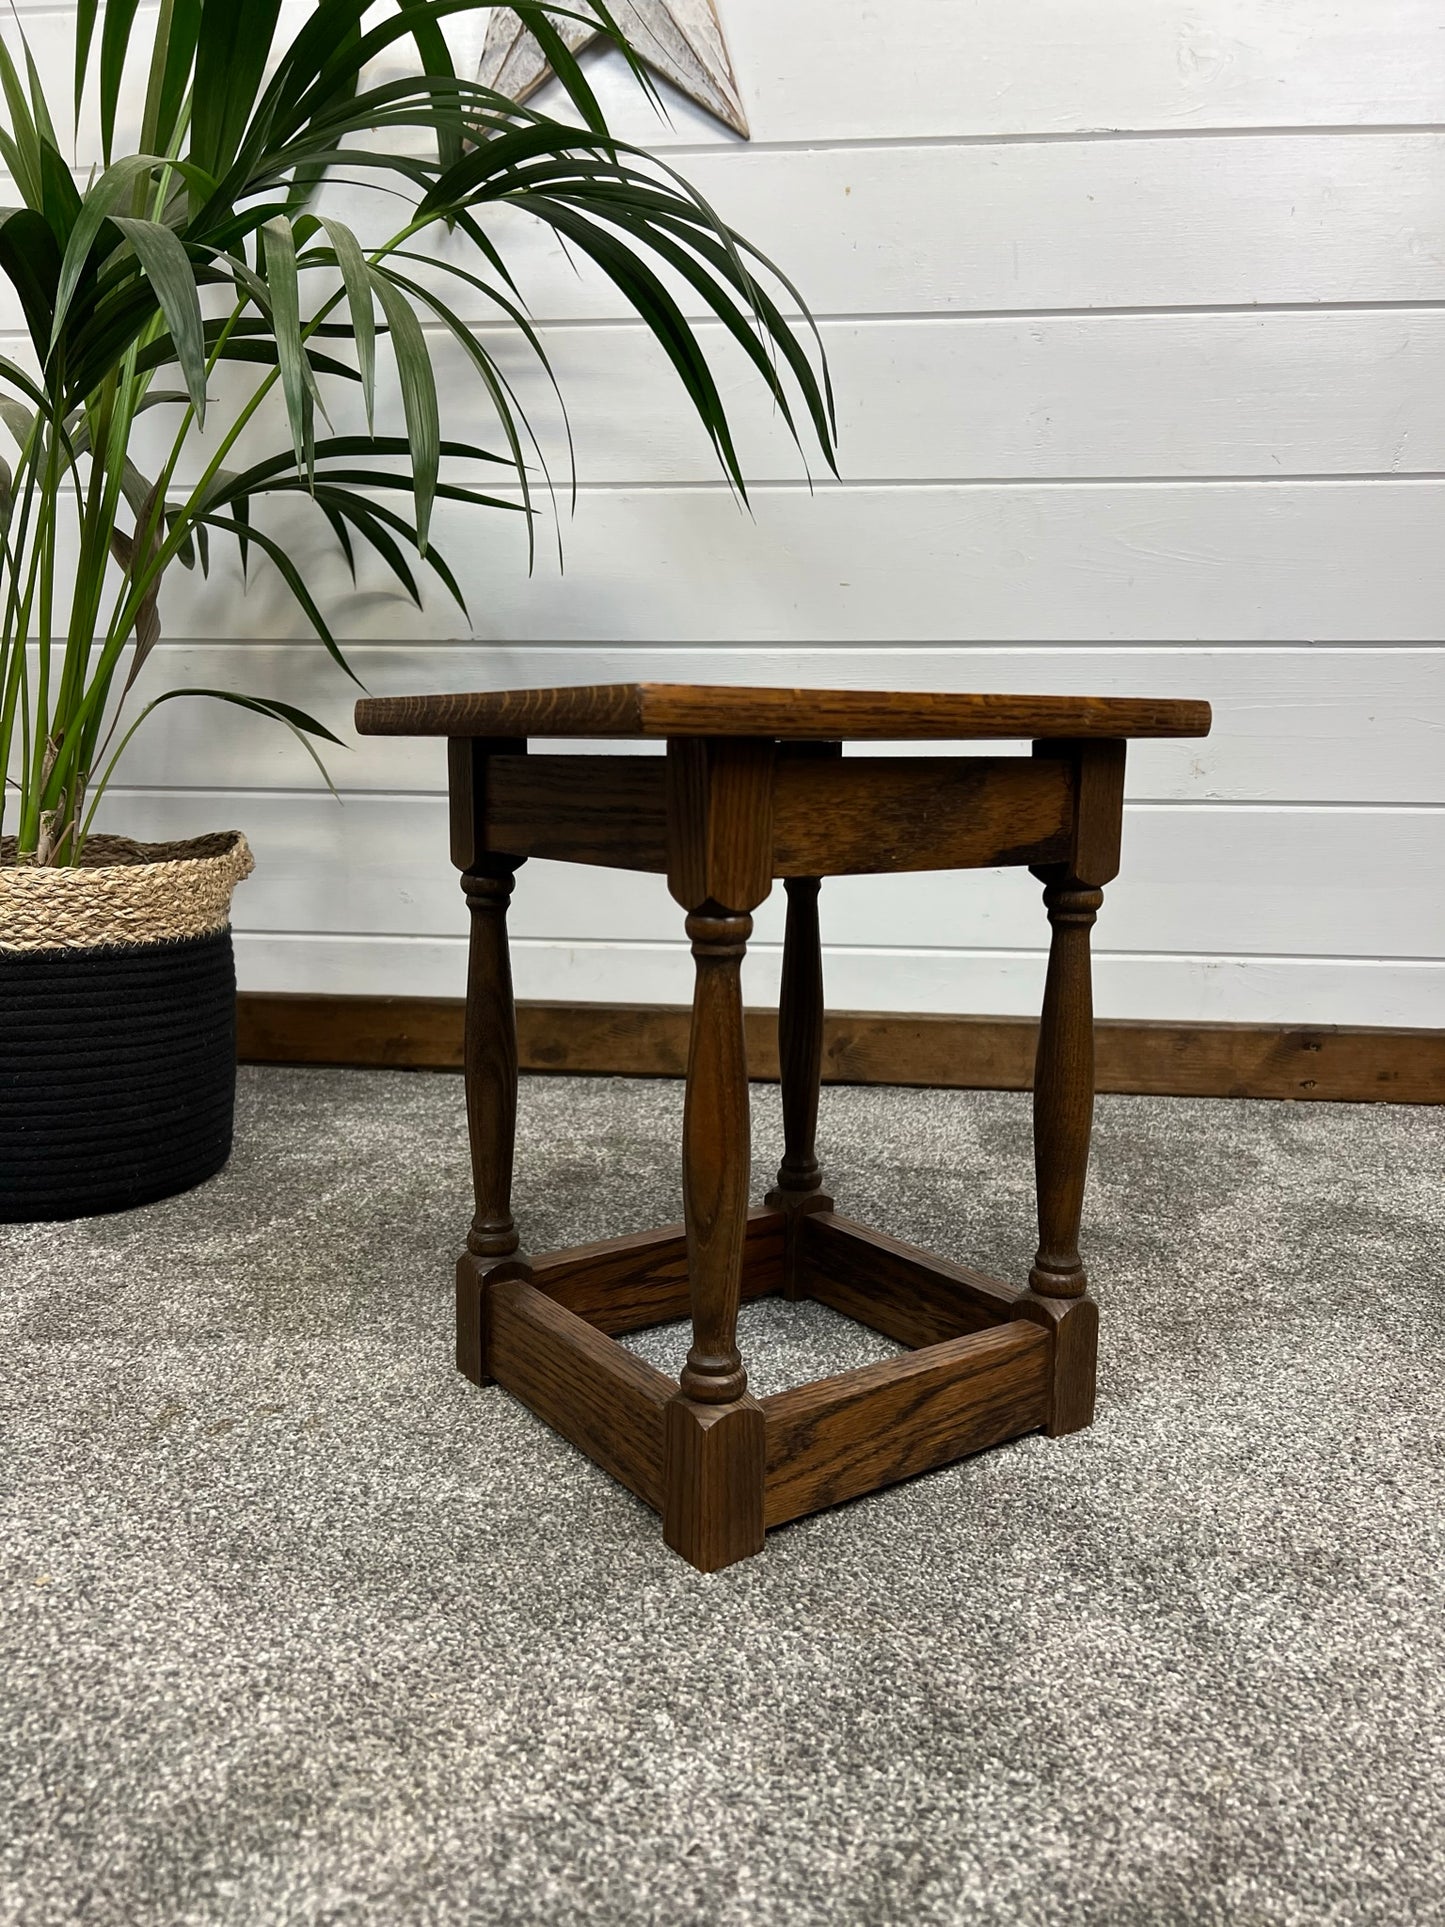 Vintage Square Oak Coffee Table Living Room Side Table Stand Rustic Farmhouse